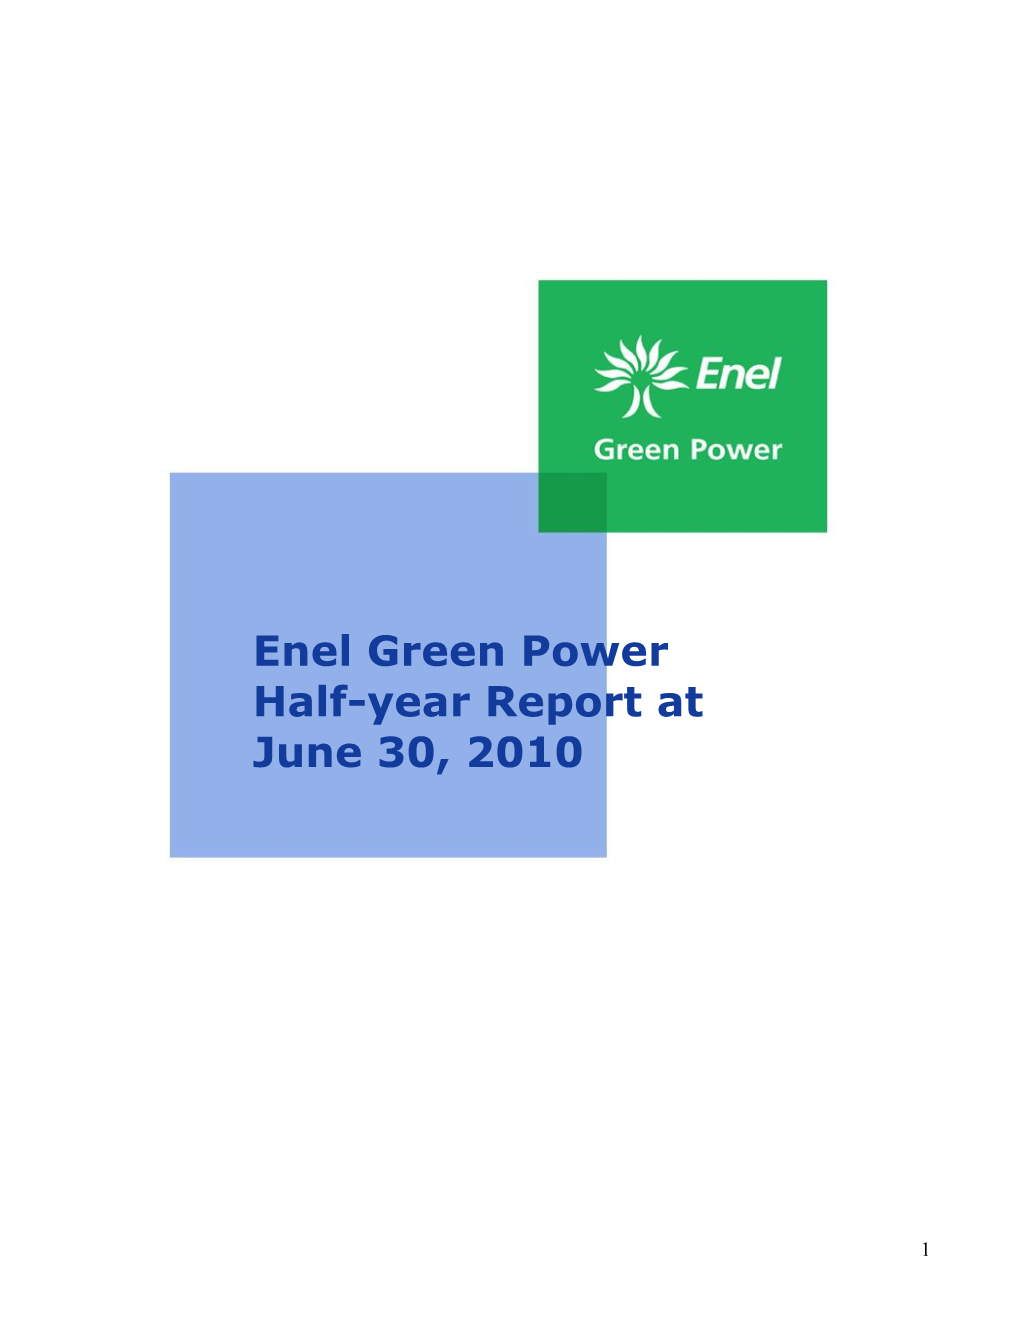 Half-Year Financial Report at June 30, 2010 of Enel Green Power Group